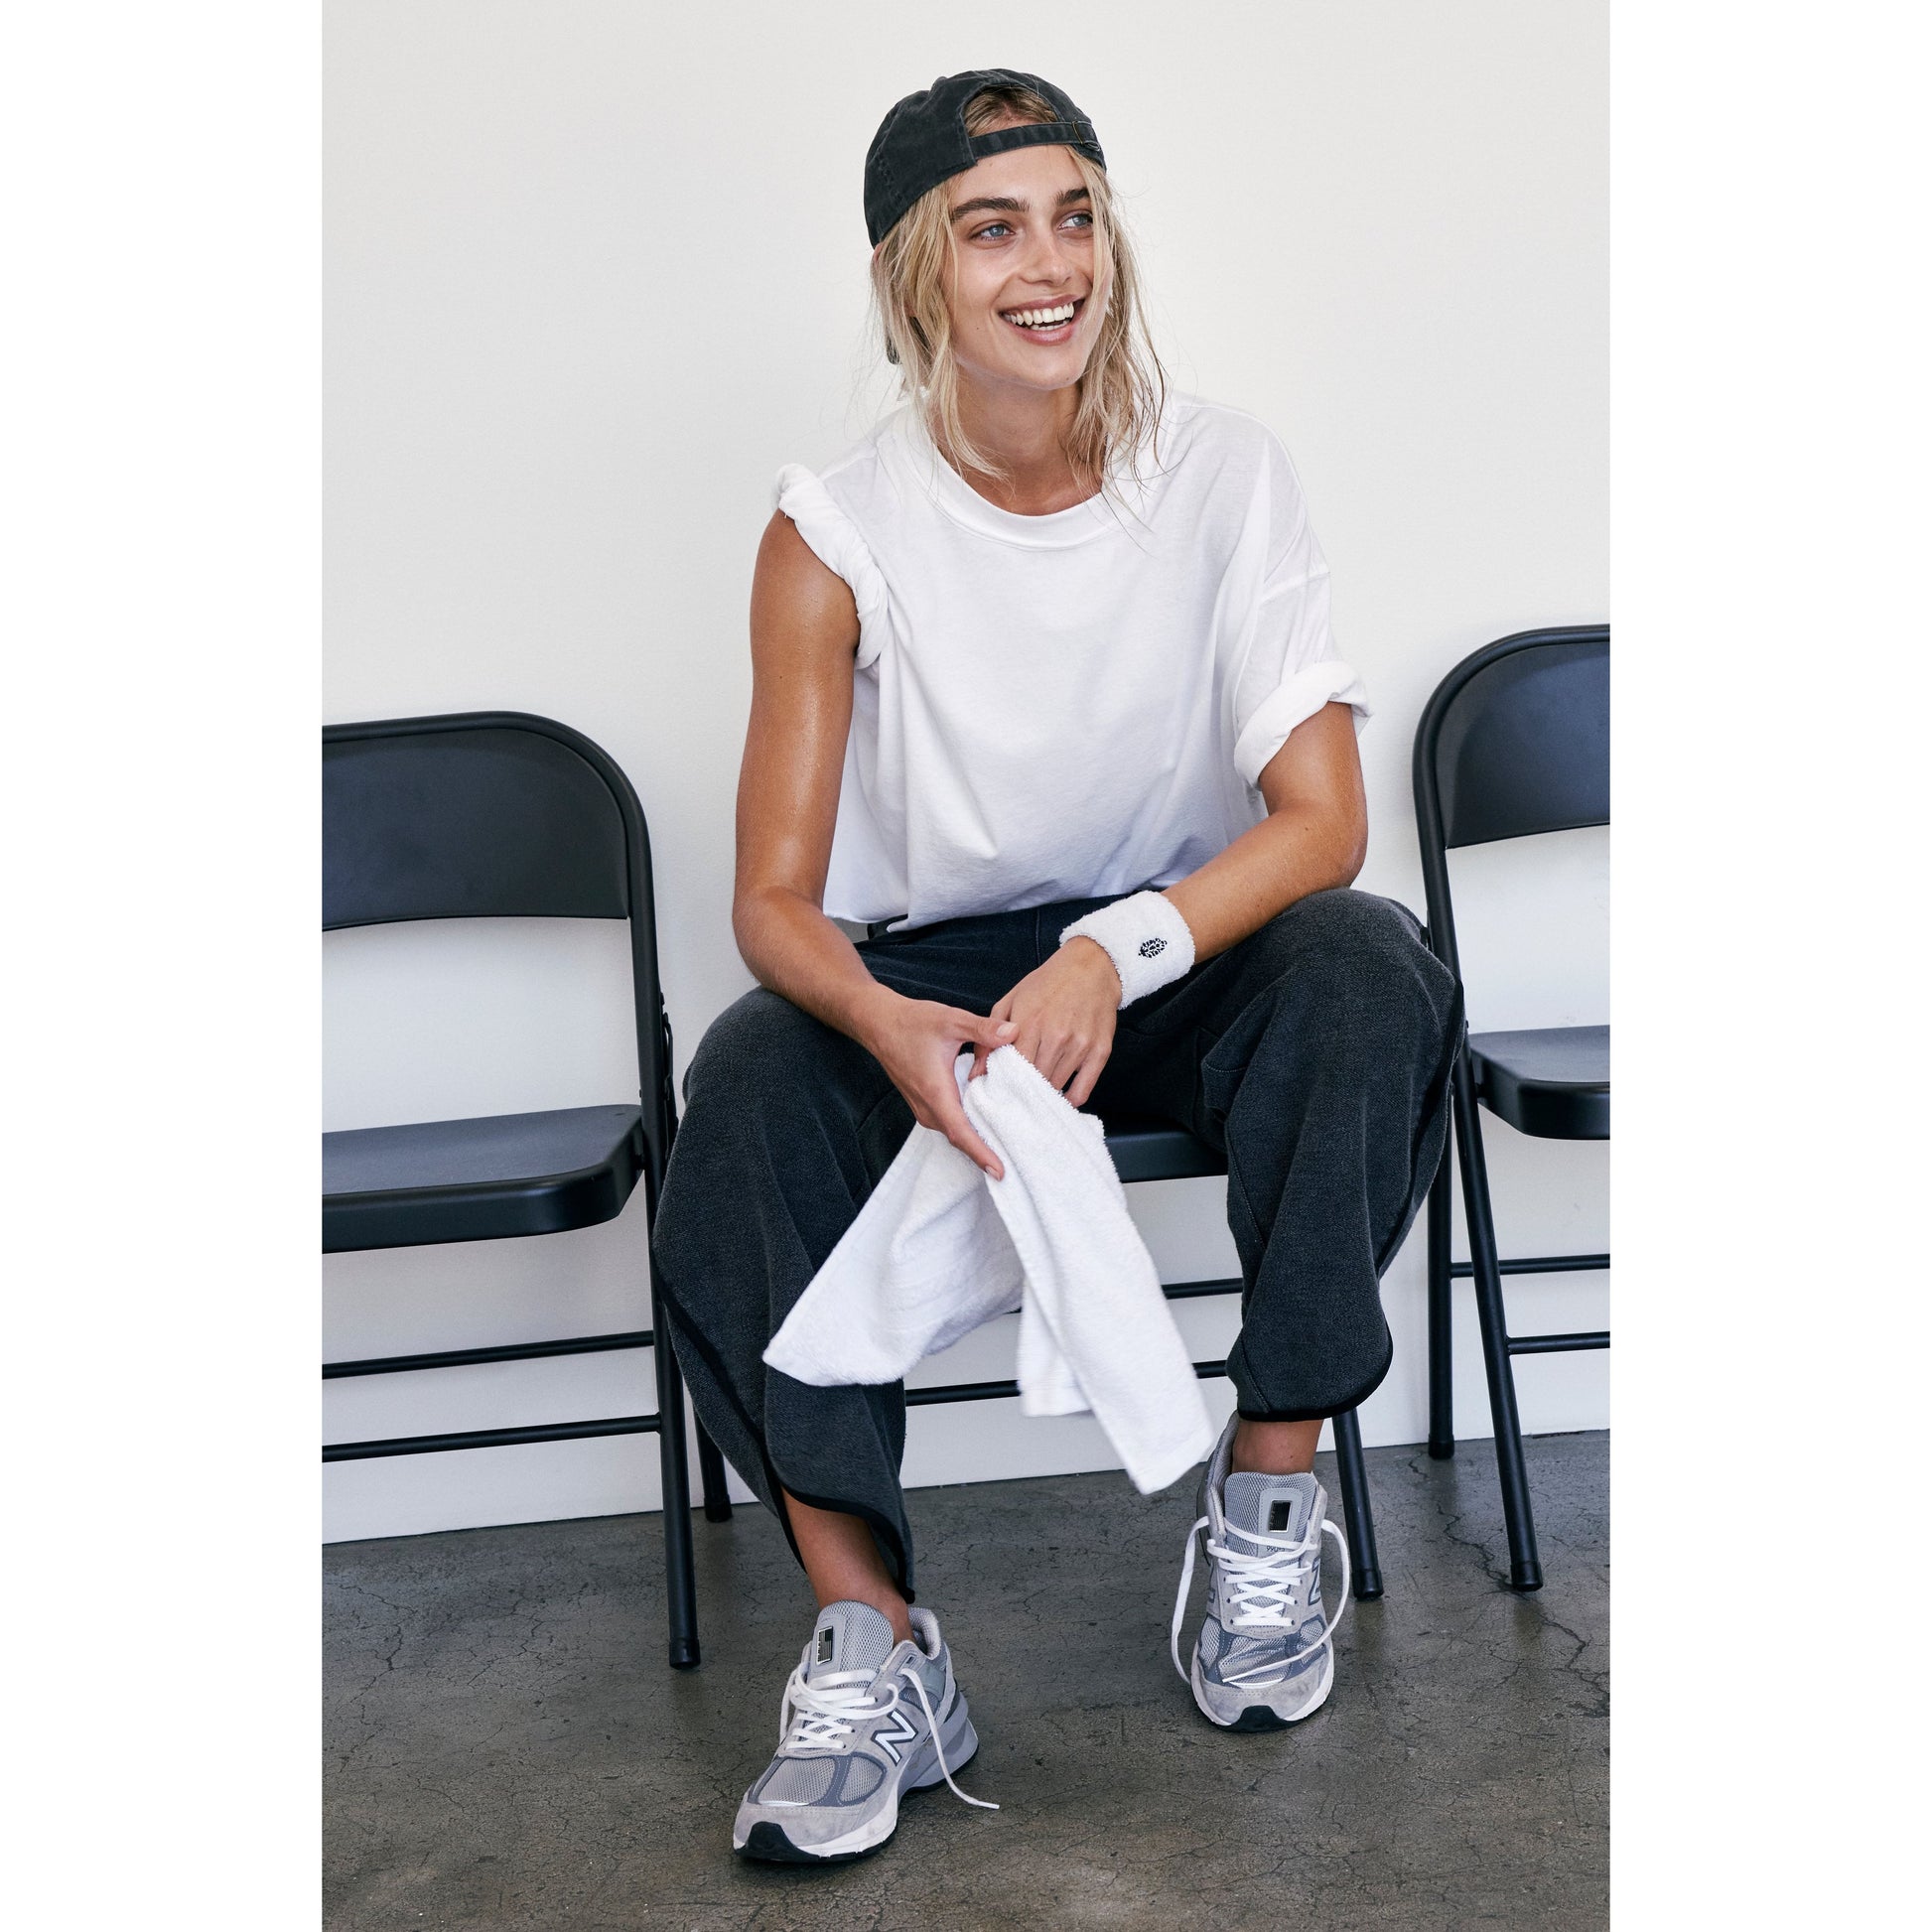 Woman in casual attire smiling, sitting on a bench with a towel on her lap, wearing an oversized boxy fit white Free People Movement Inspire Tee, black cap, and grey sneakers.